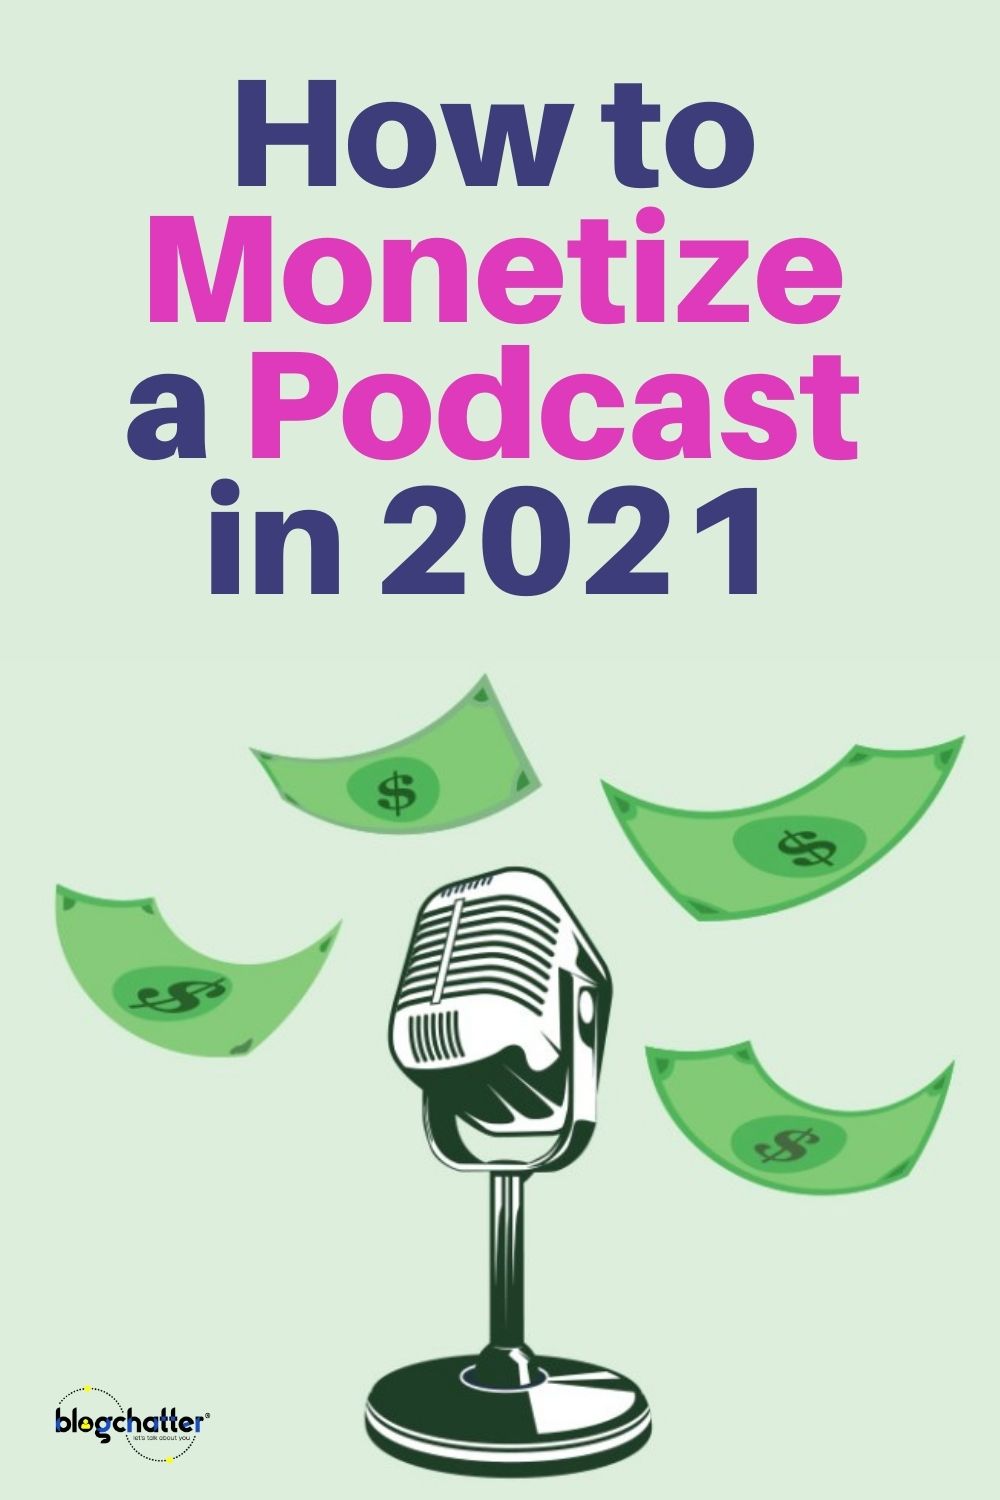 how to monetize a podcast in 2021